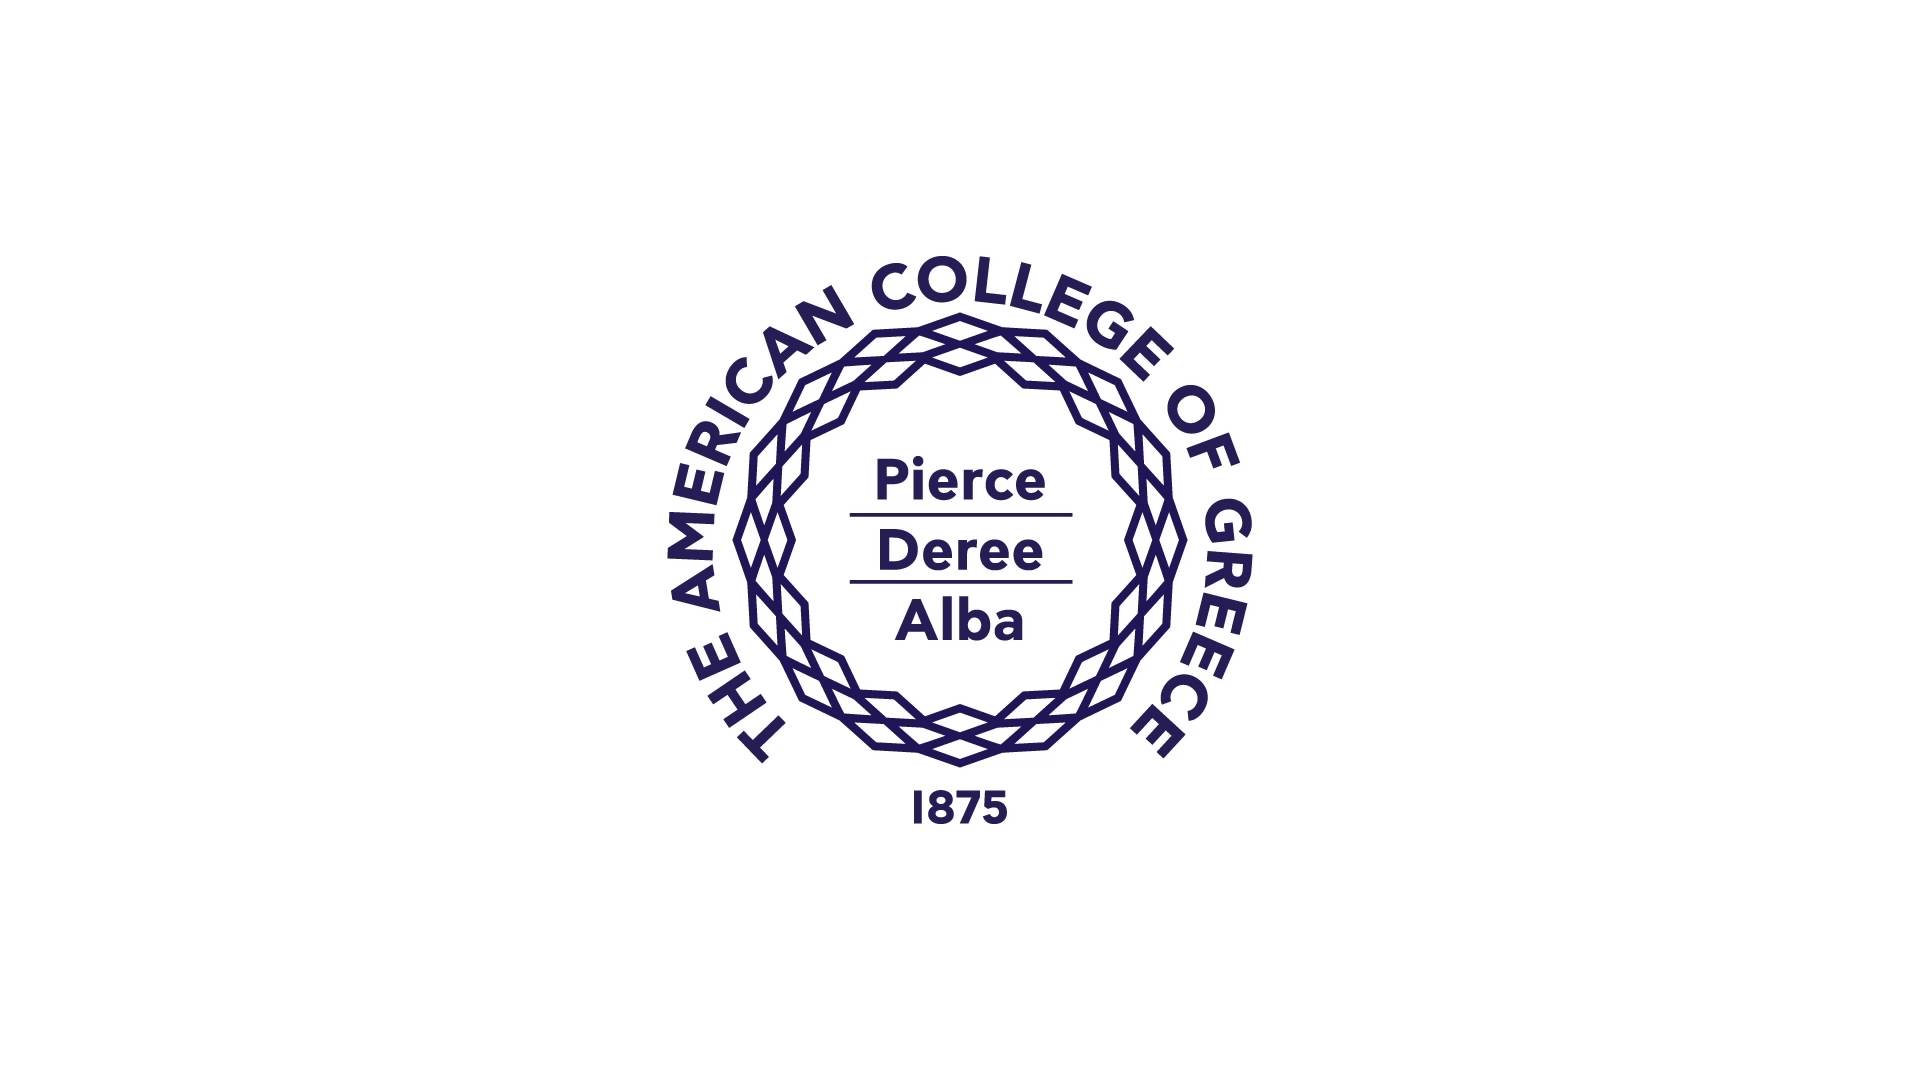 American College of Greece